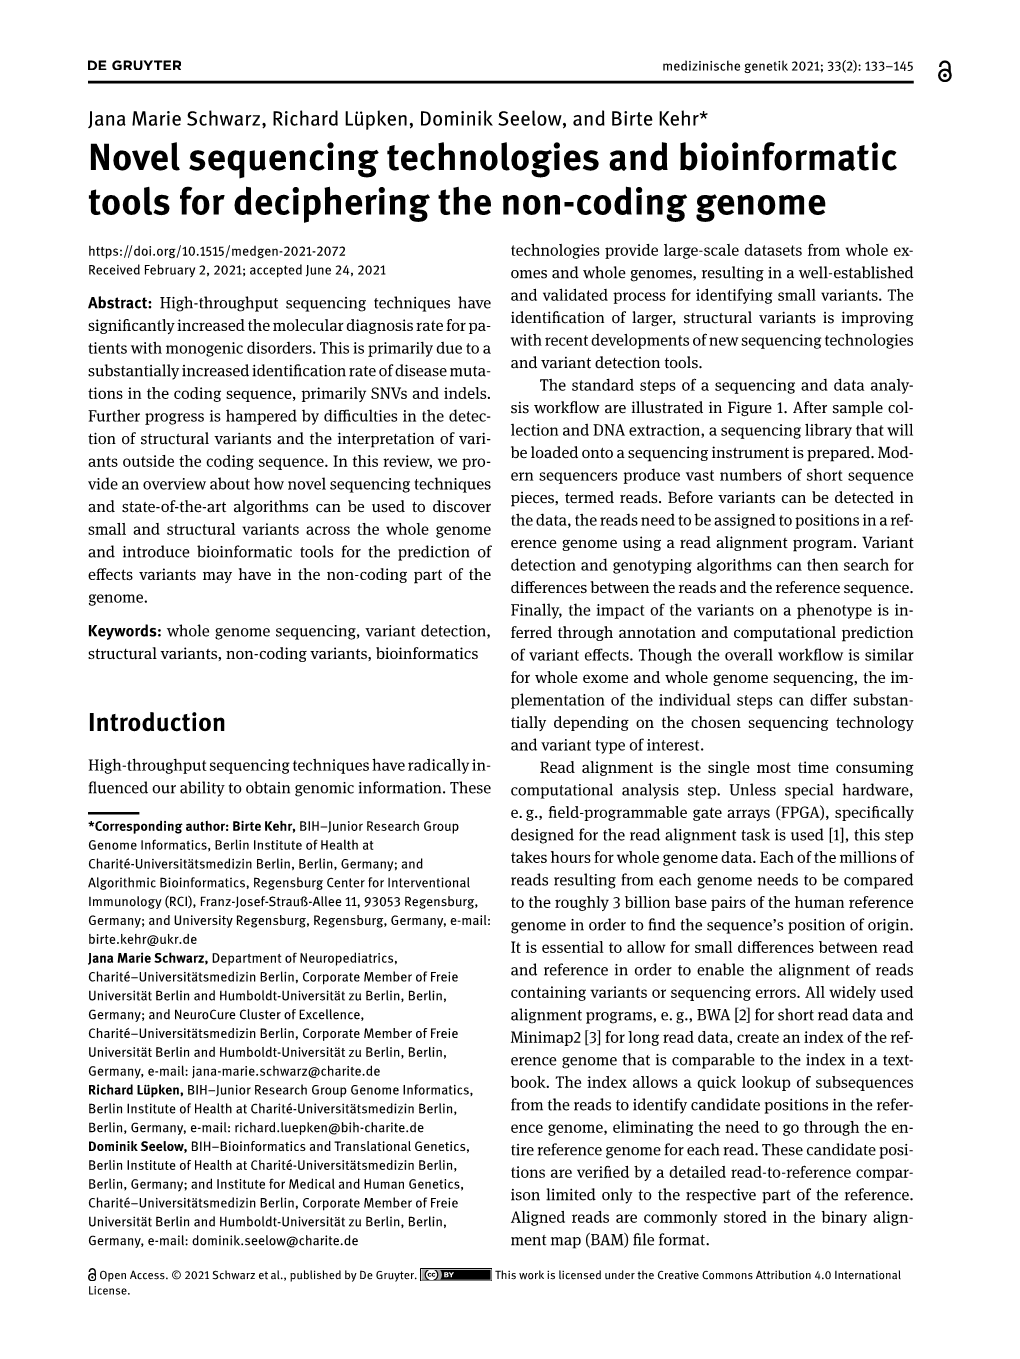 Novel Sequencing Technologies and Bioinformatic Tools for Deciphering the Non-Coding Genome